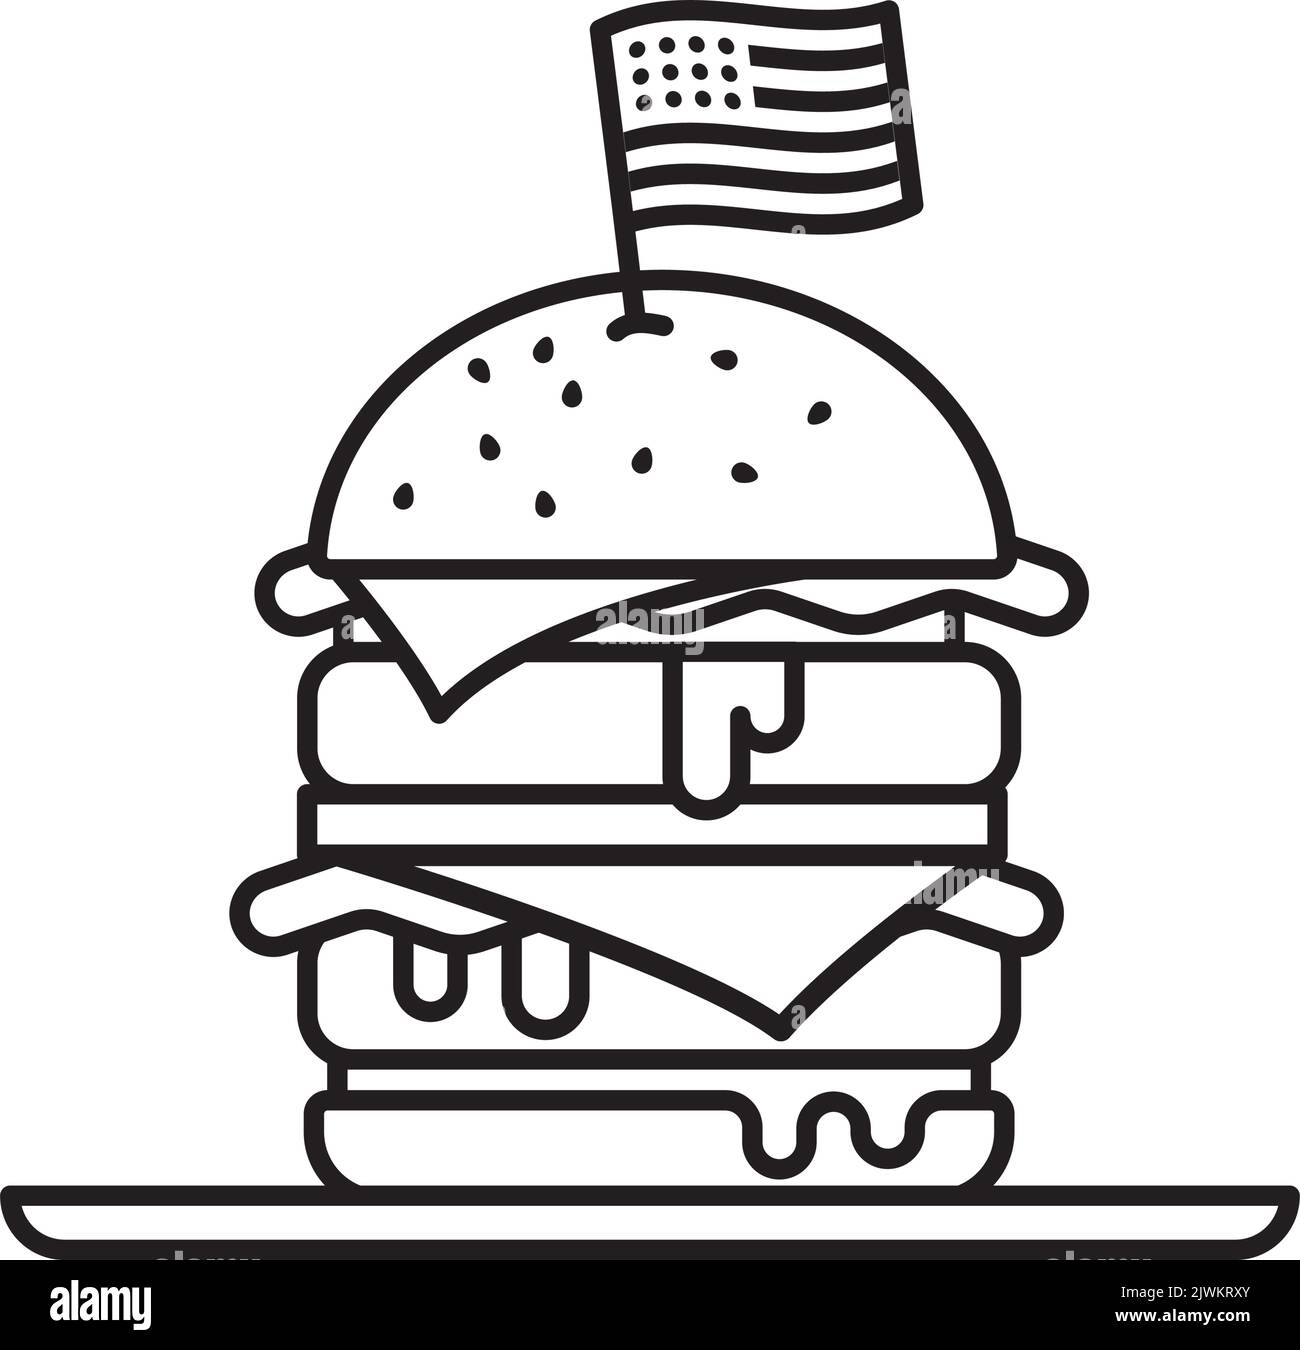 Double Cheeseburger with US flag line icon vector illustration. American fast food symbol. Stock Vector